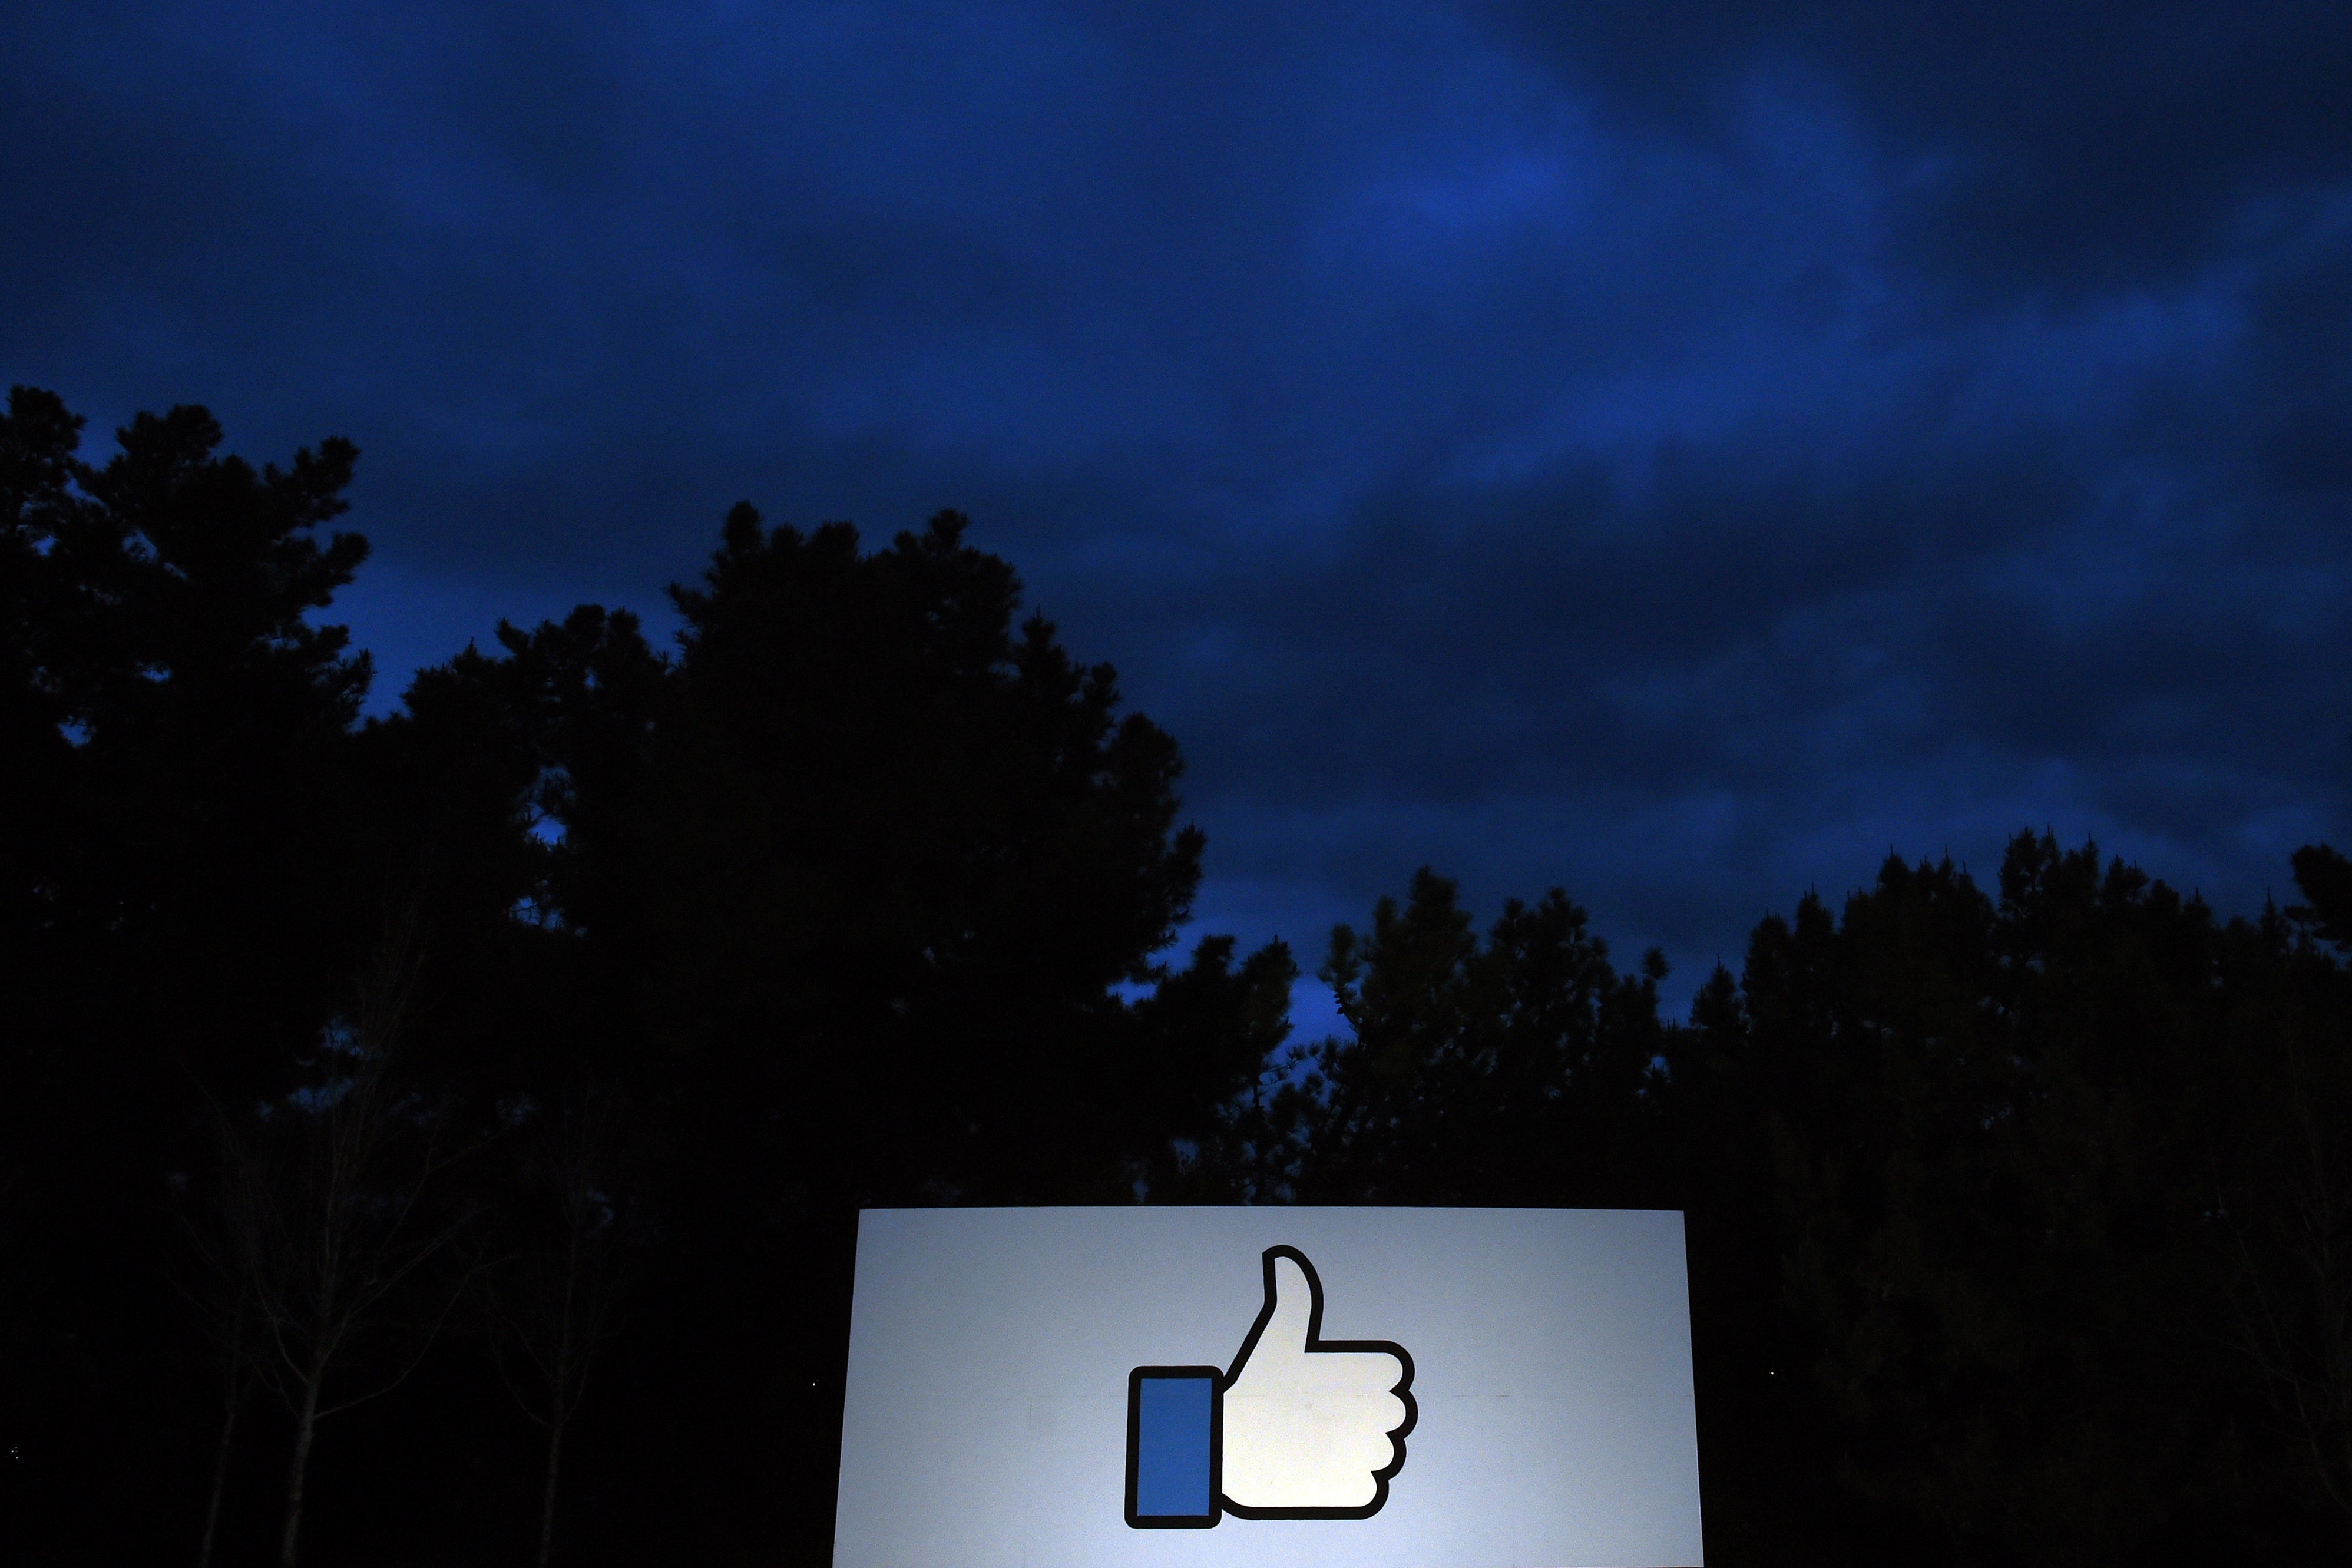 A thumbs-up "like sign" in front of trees at the entrance to Facebook headquarters in Menlo Park, California.